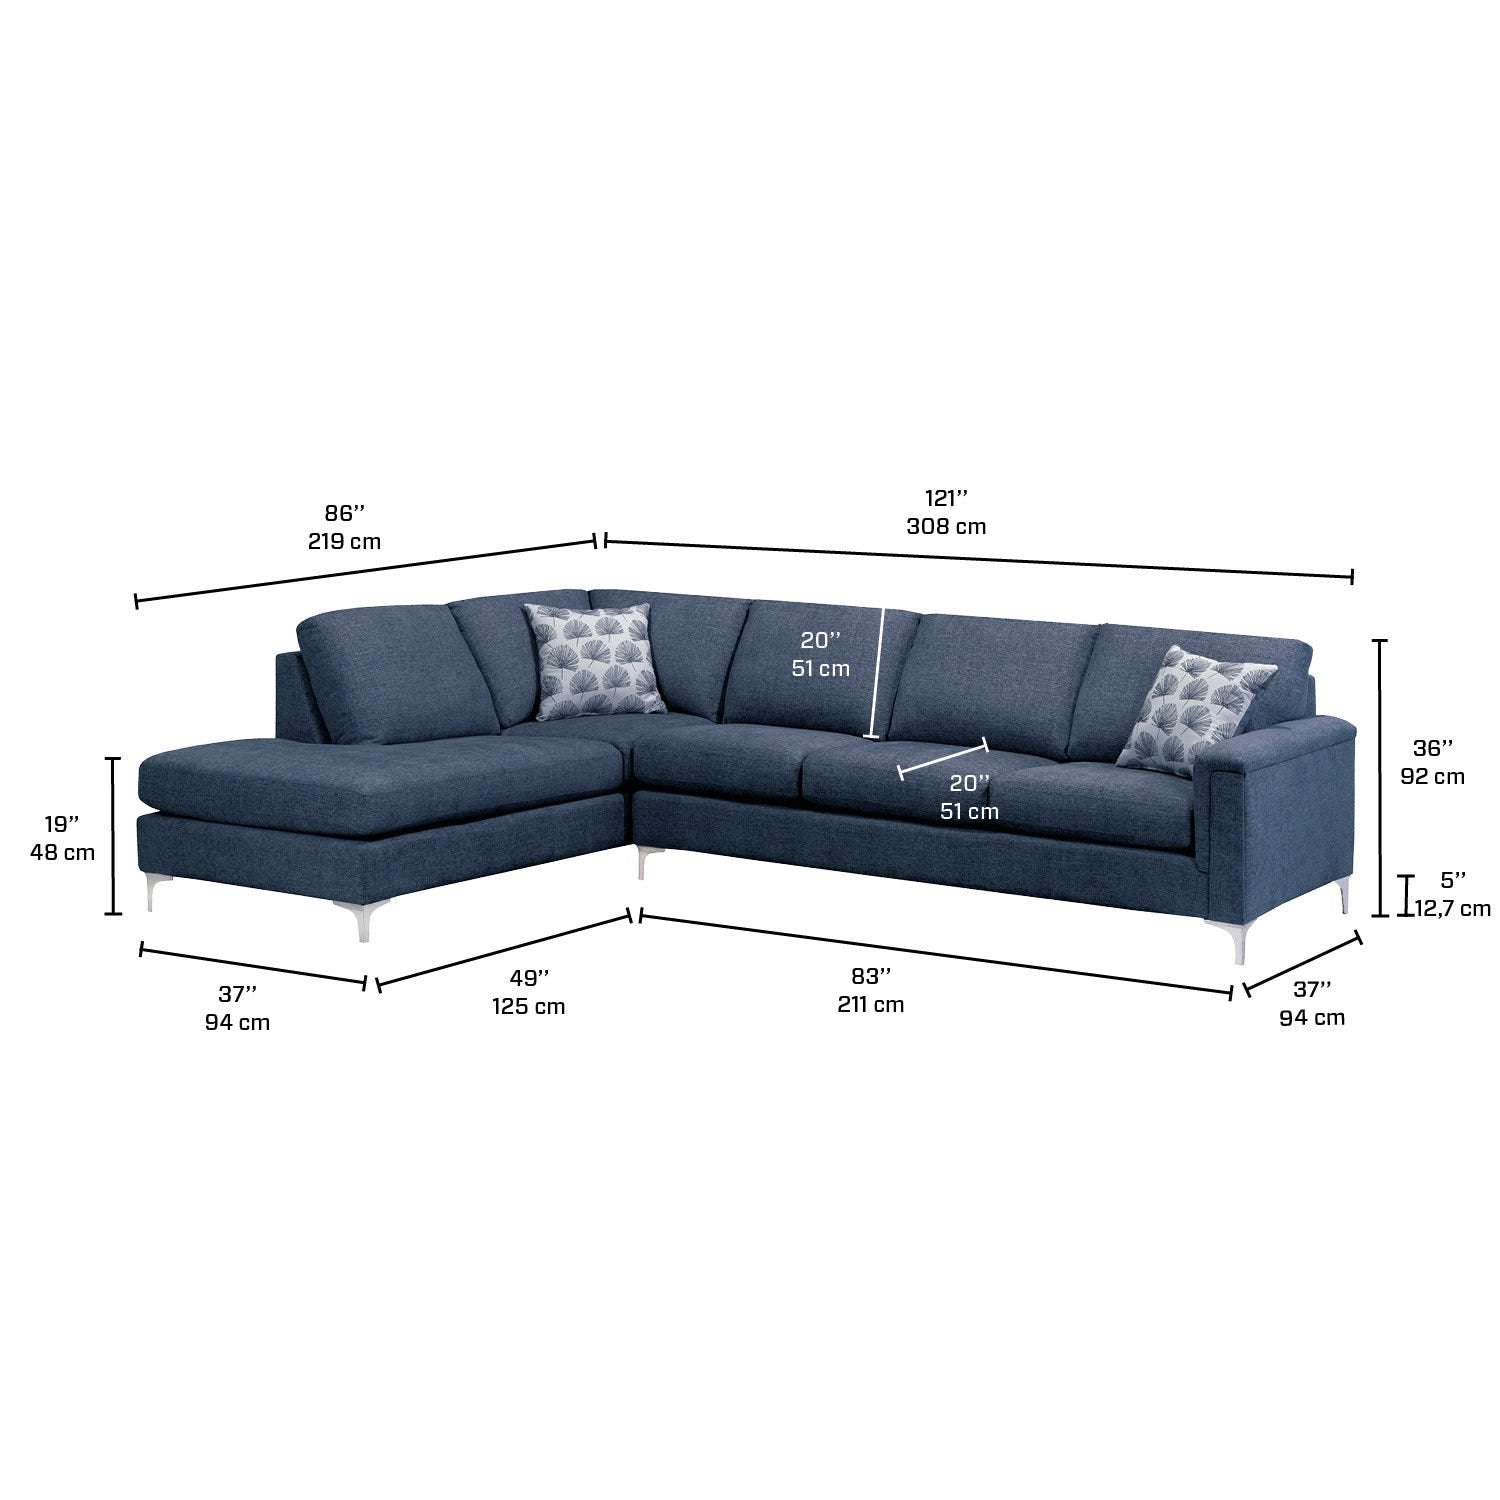 Canadian Made Hopkins Collection Fabric Sectional Sofa in PULSAR 304 BLUE 9814